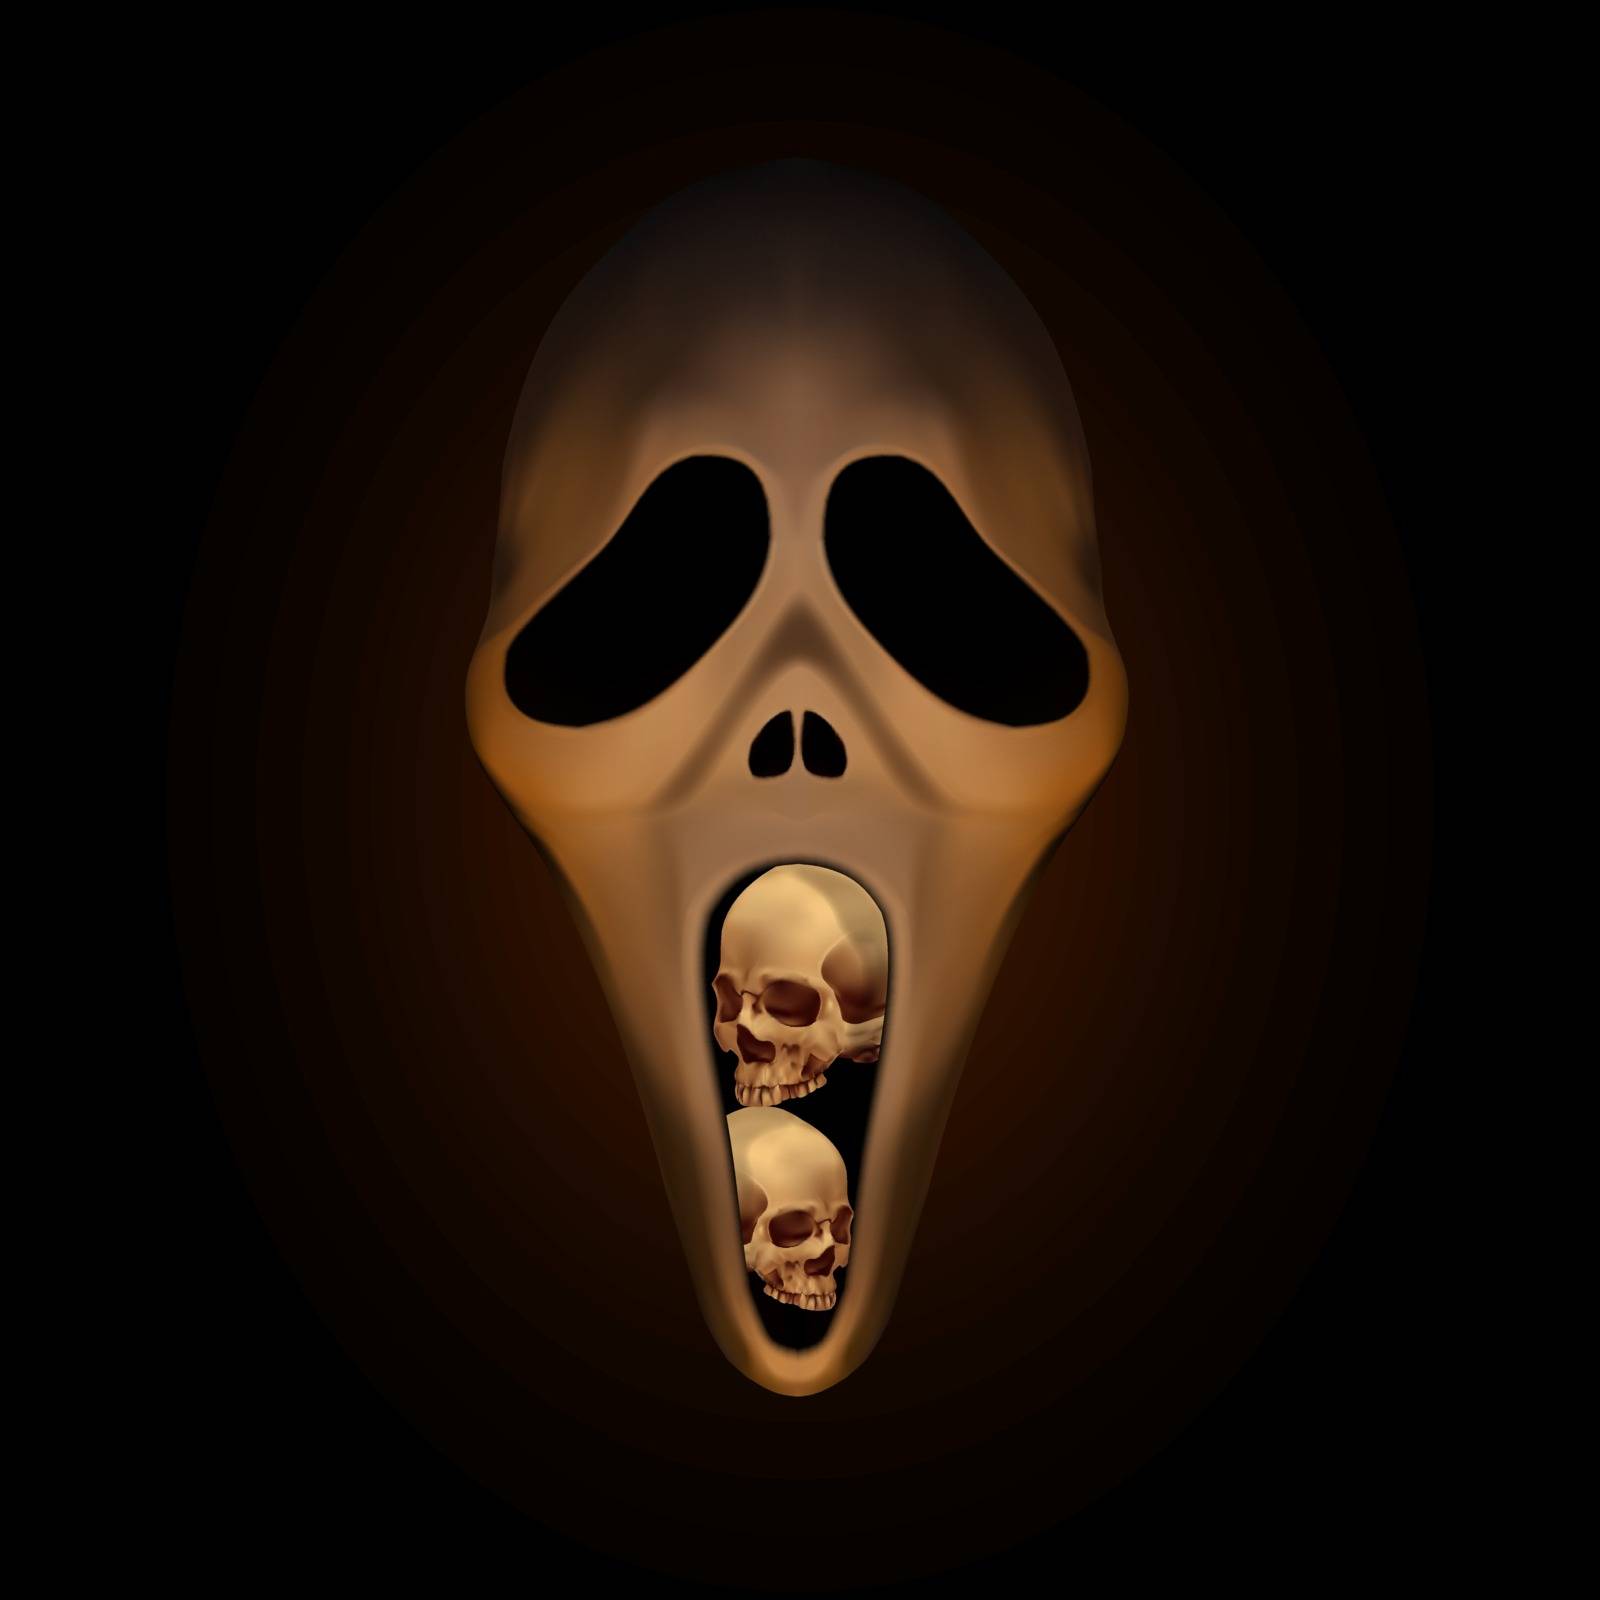 Spooky halloween mask with small human skull in mouth on dark brown background